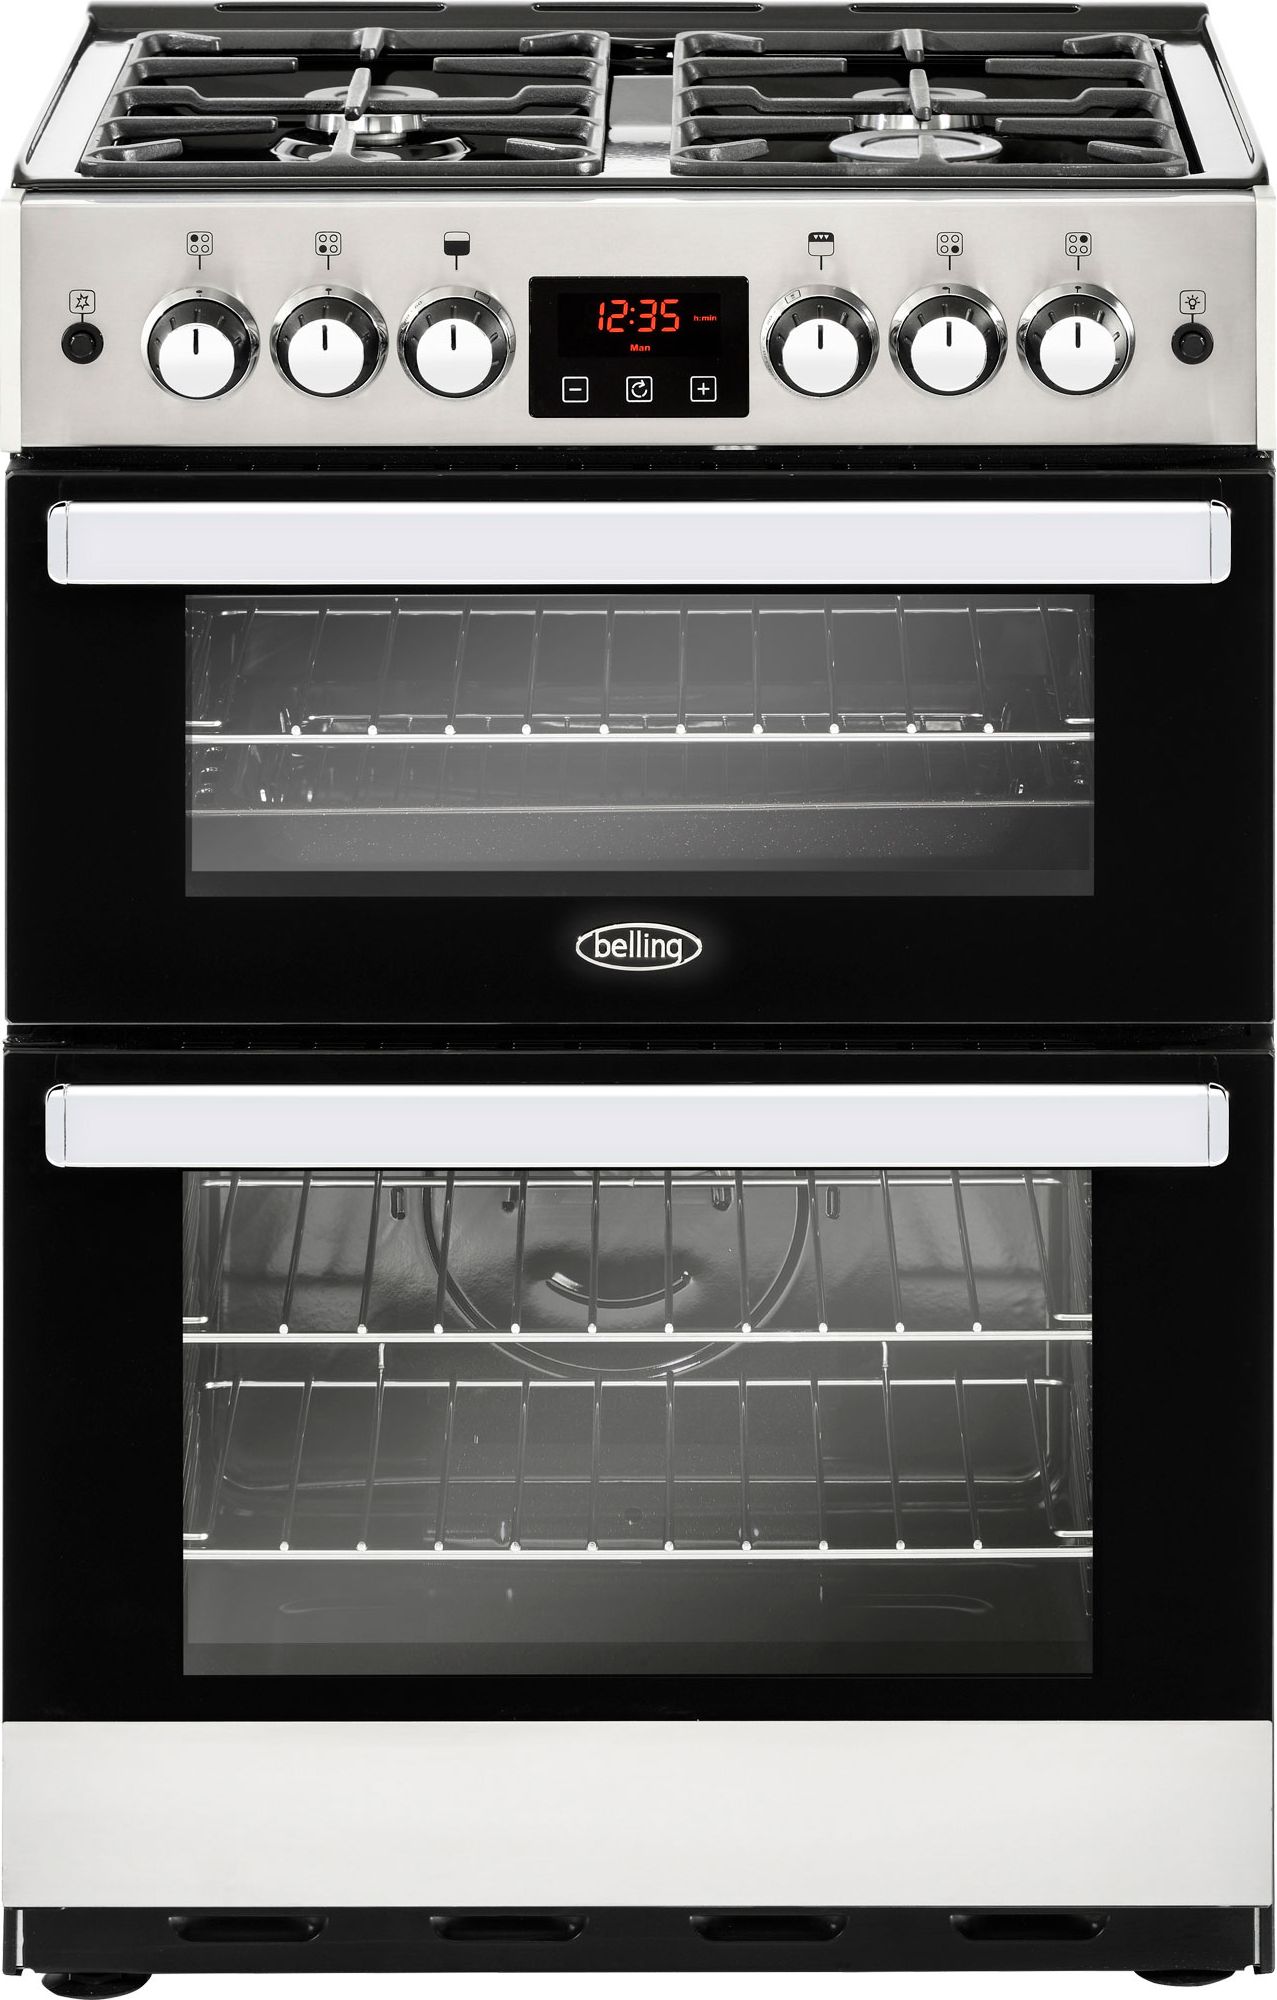 Belling Cookcentre 60G Freestanding Gas Cooker with Full Width Electric Grill - Stainless Steel - A+/A Rated, Stainless Steel